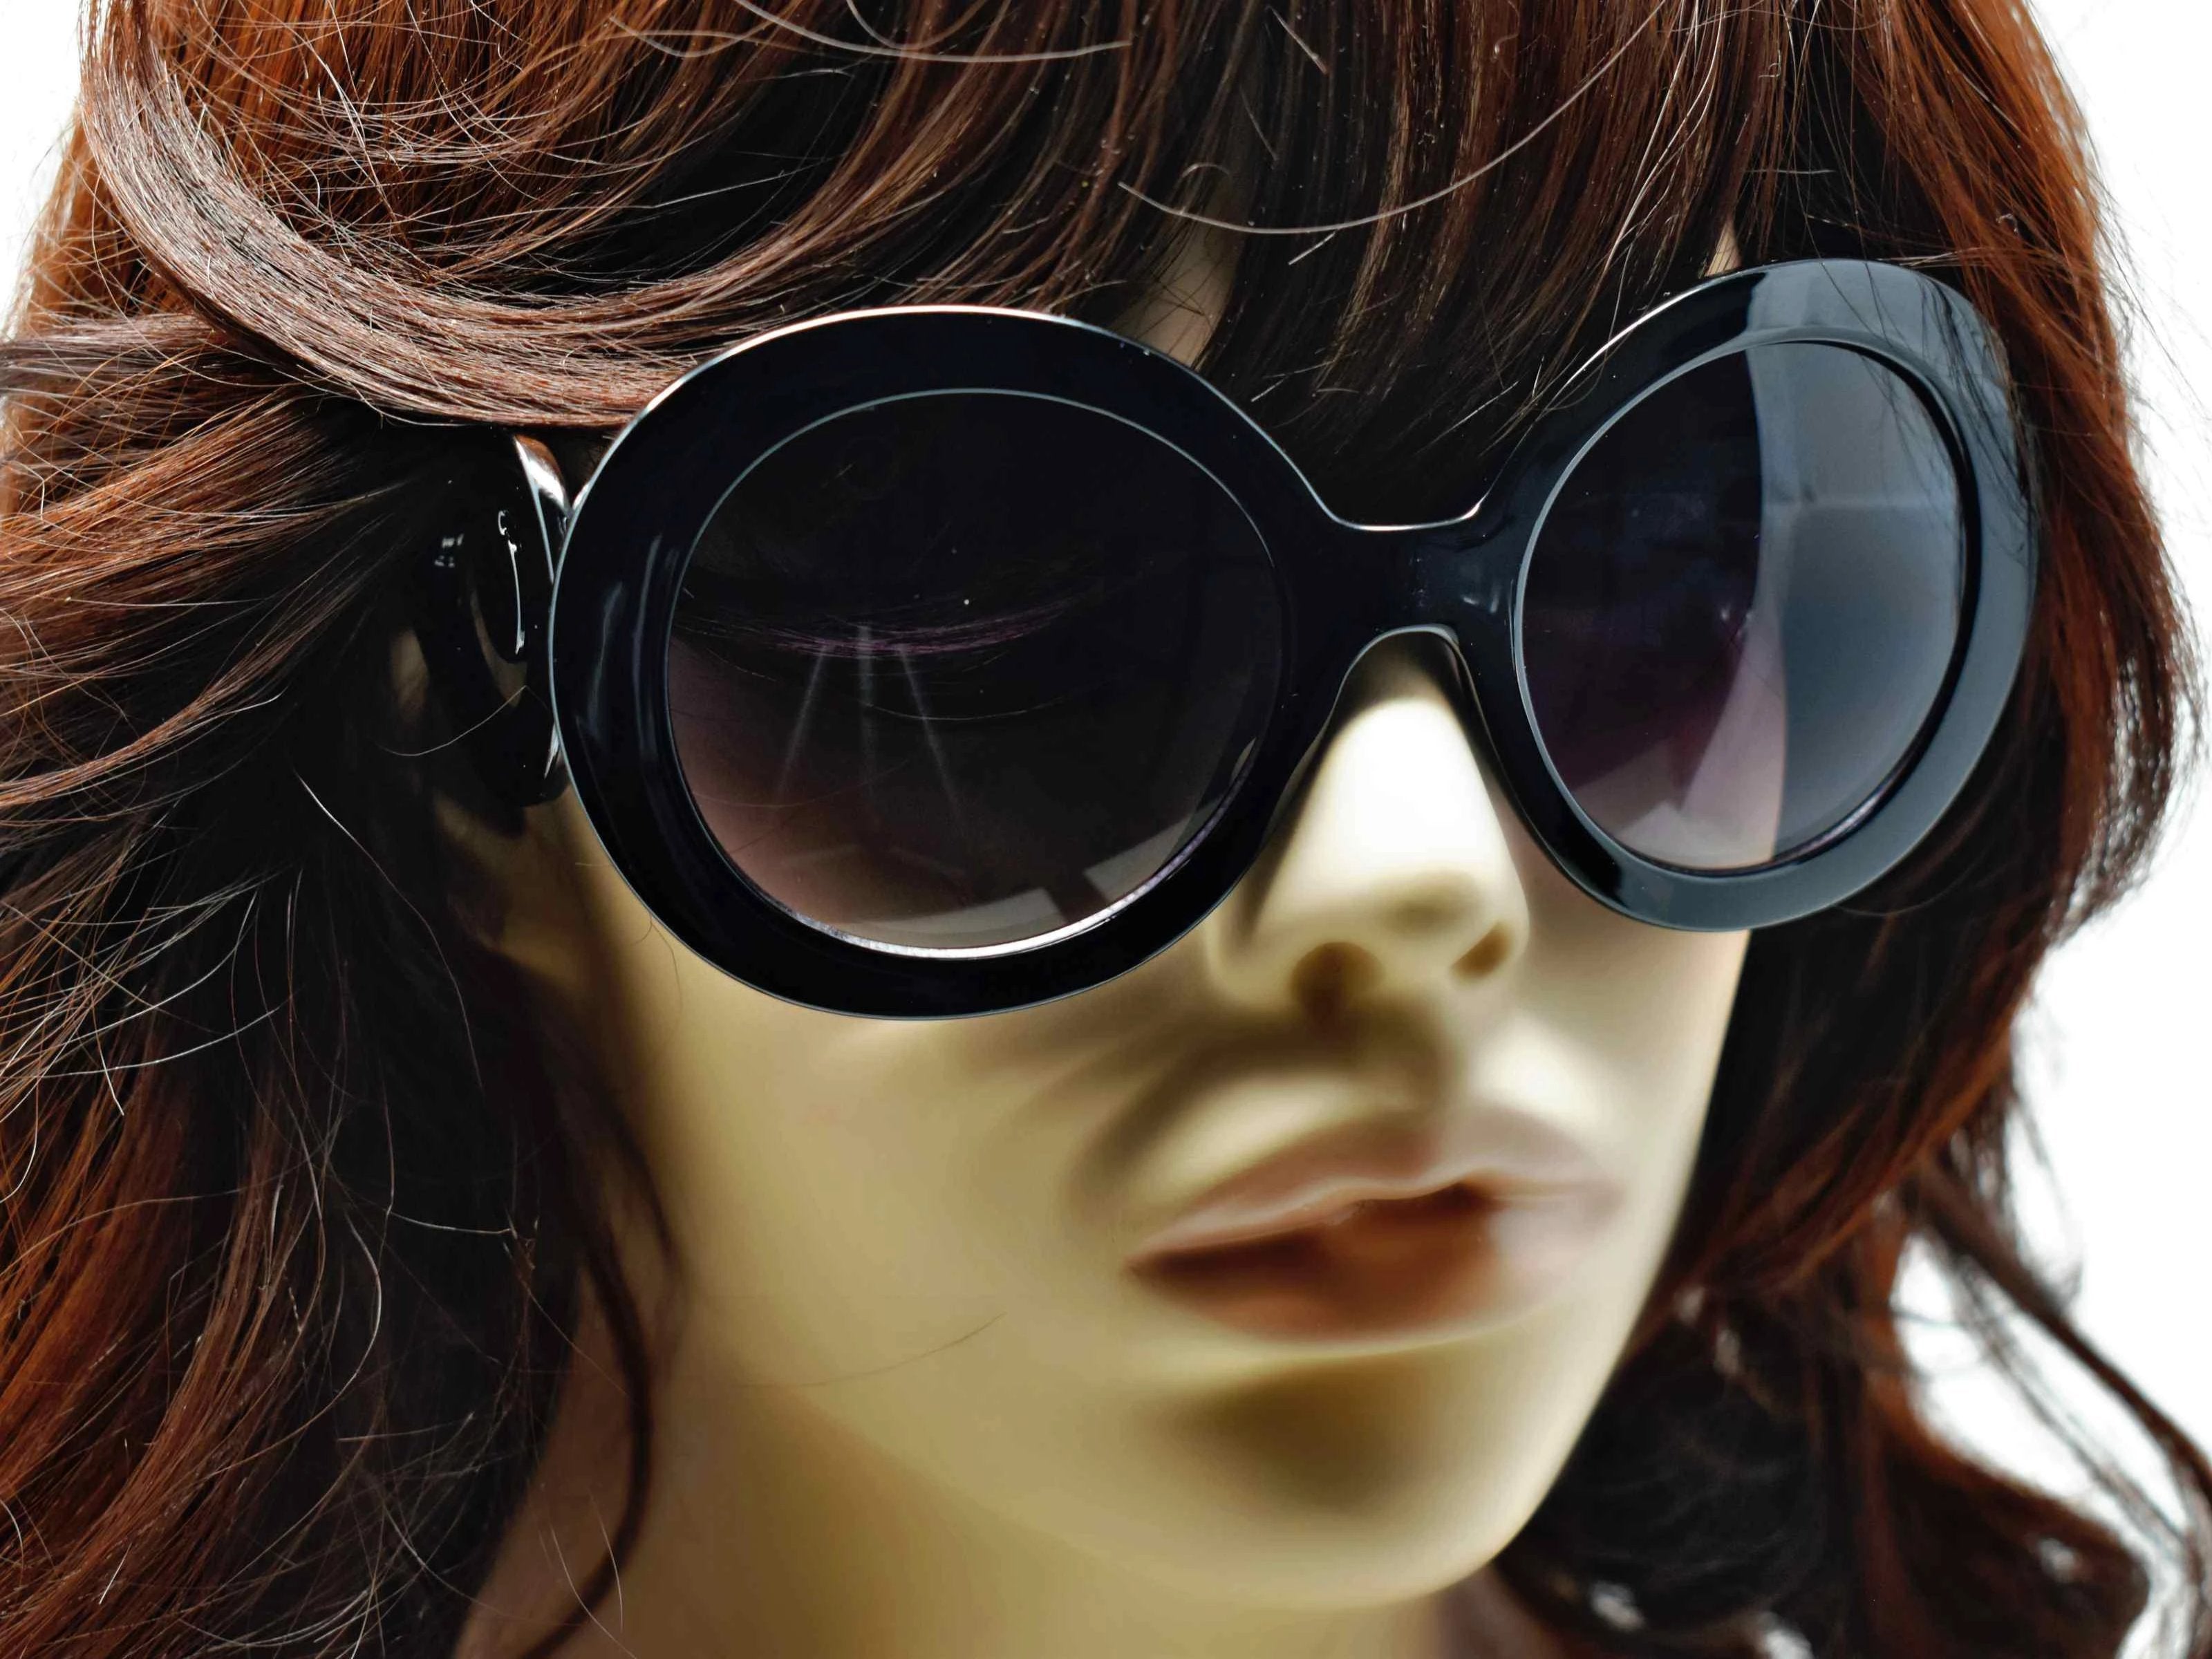 Be prepared to add our Clover Black frame glasses with swirl handle and a black lens to your top 10 go too favs.